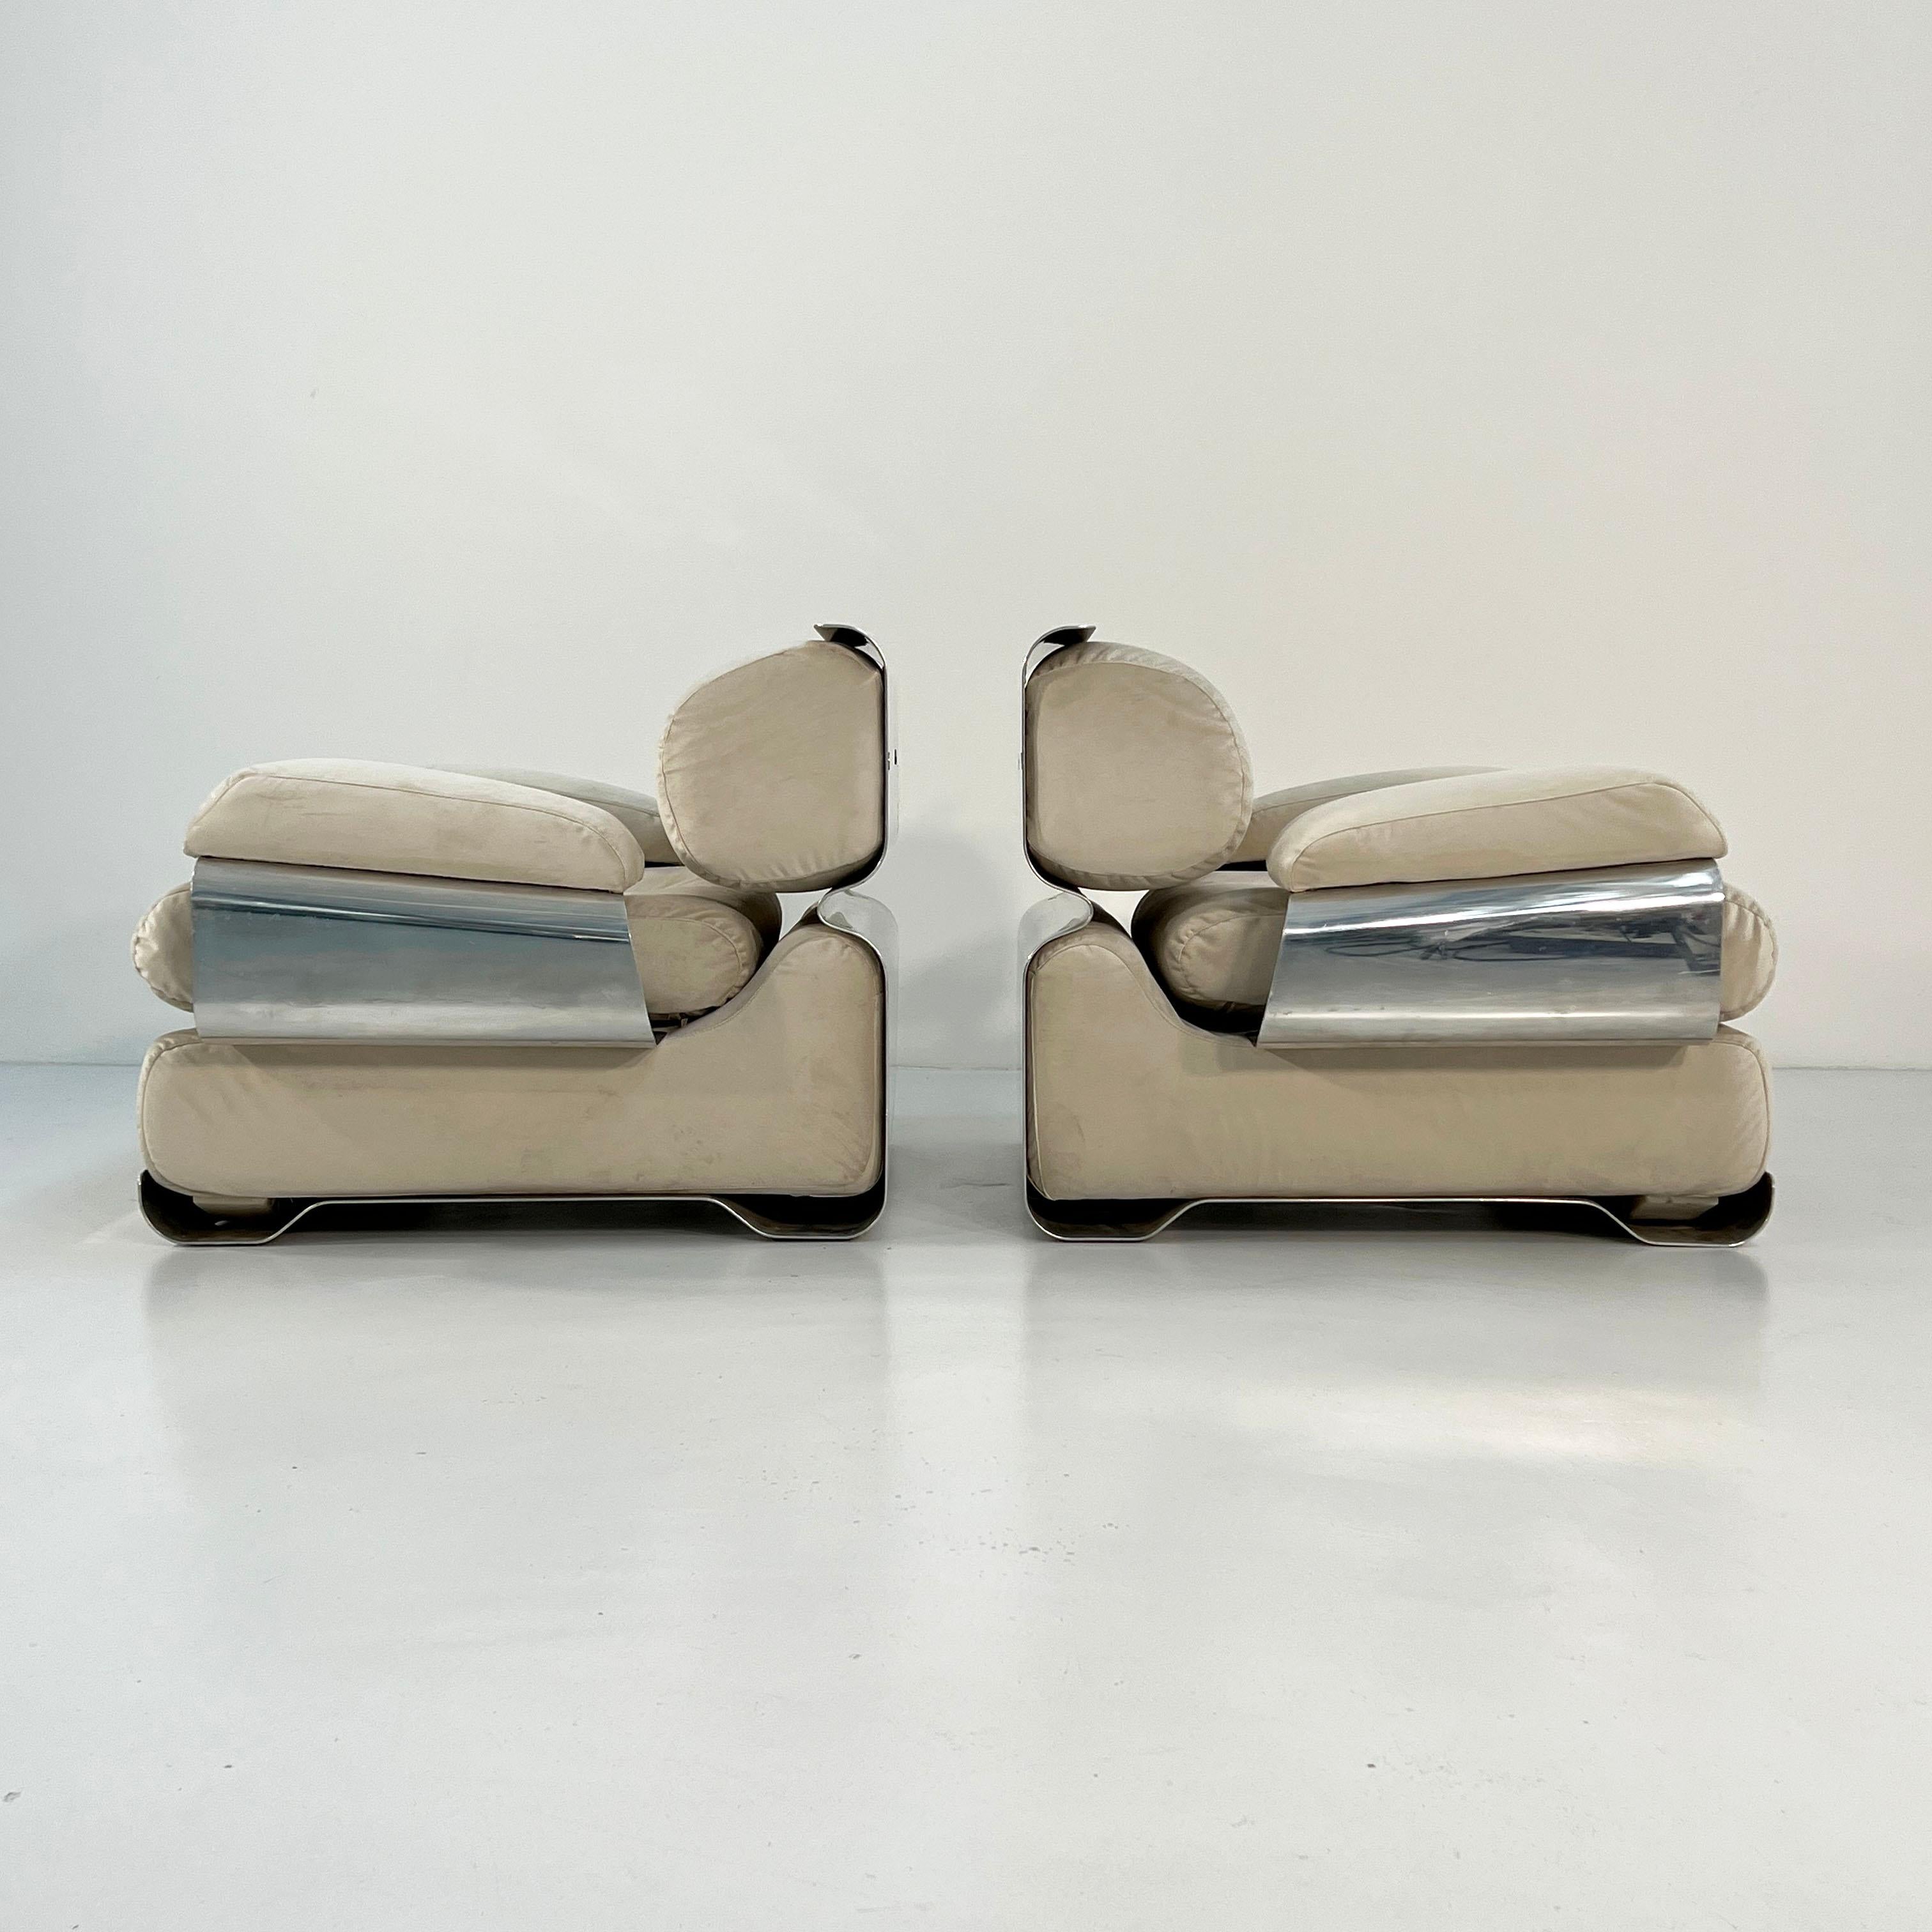 Italian Pair of Armchairs by Gian Pietro Arosio for D.A.S, 1970s